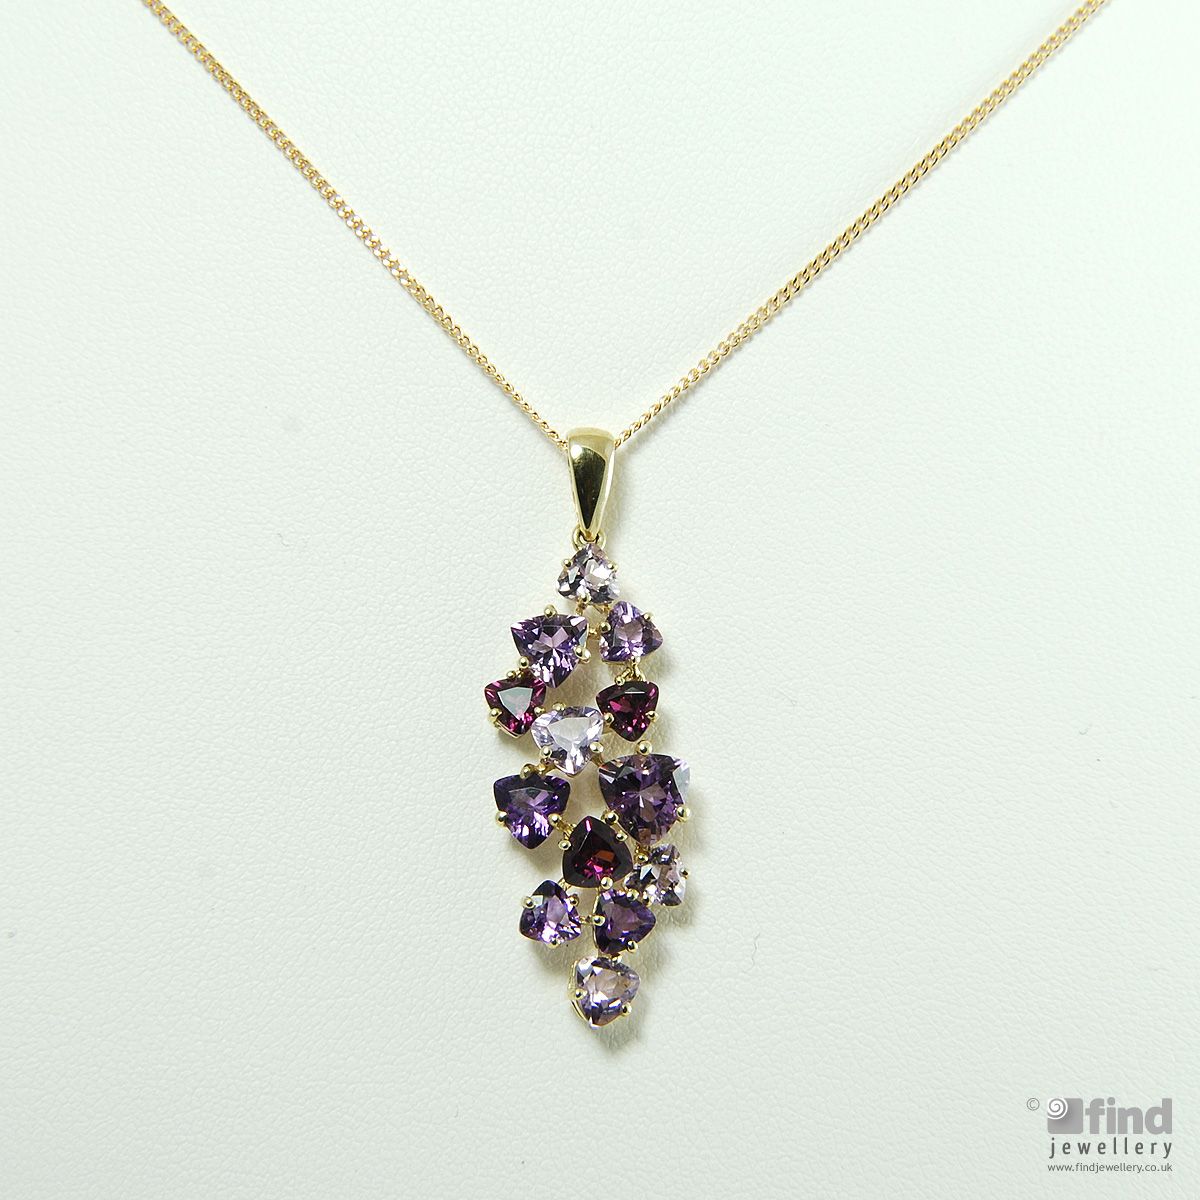 9ct Gold Amethyst and Brazilian Garnet Necklace